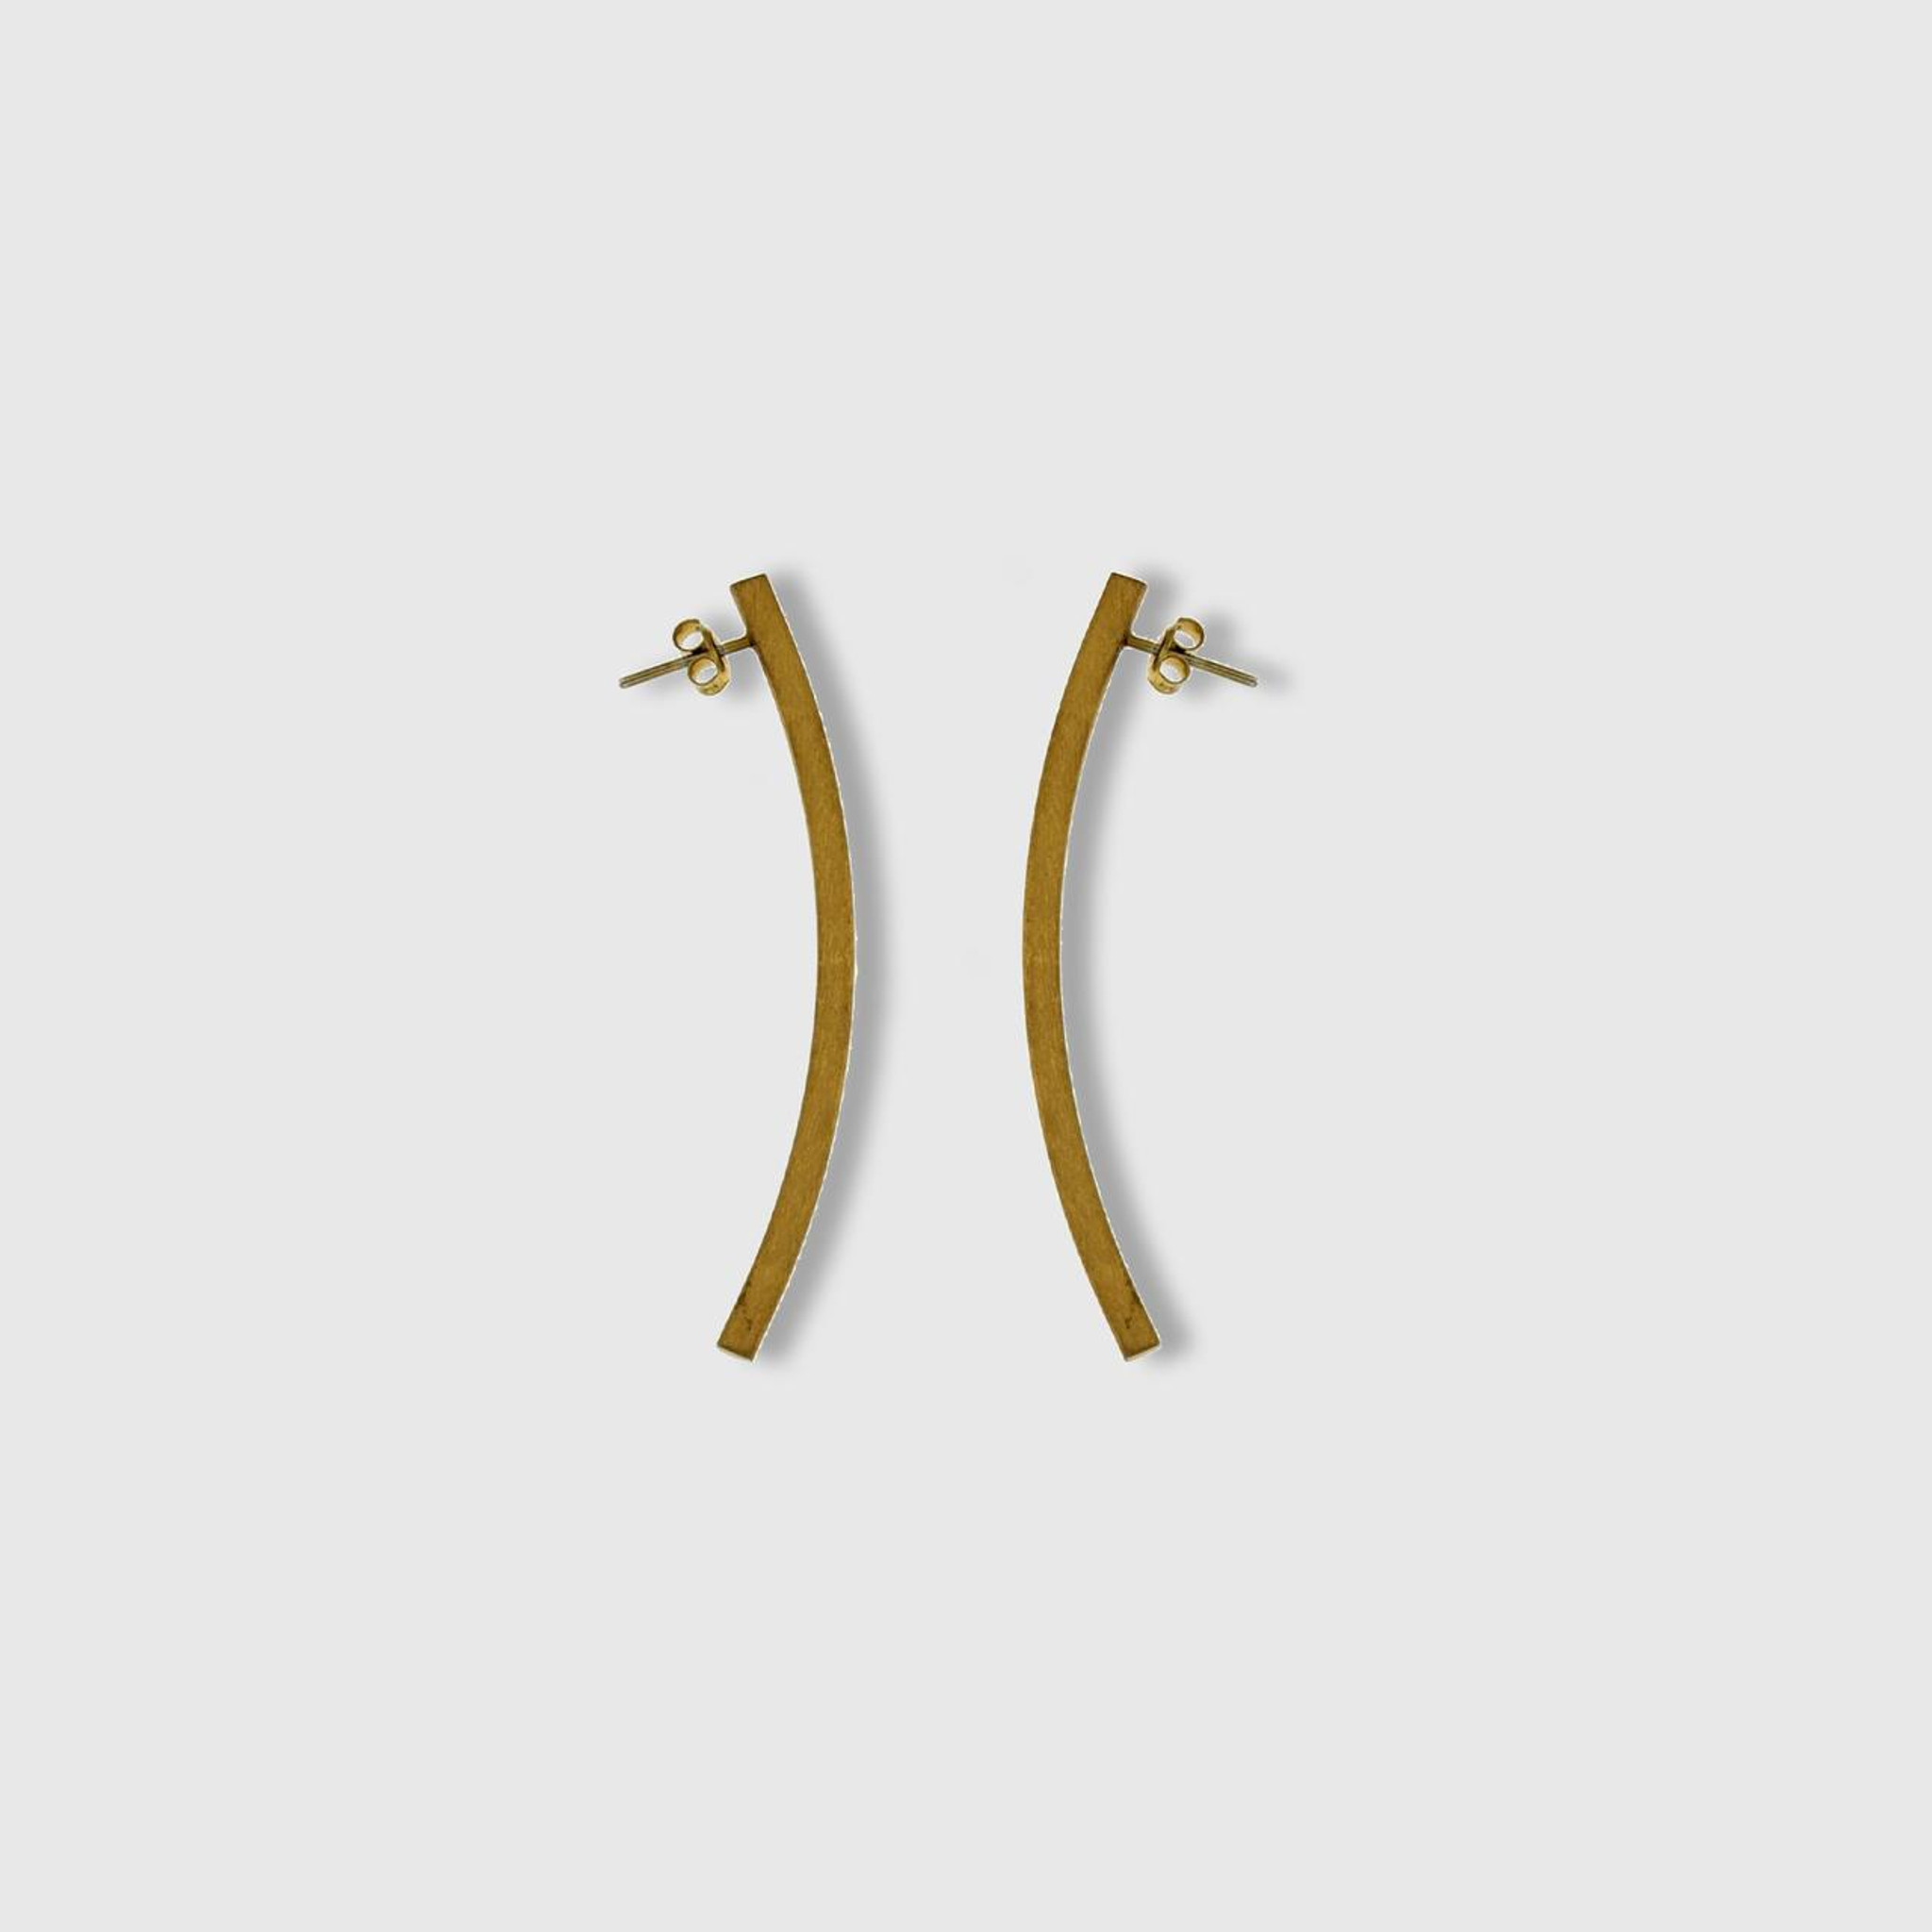 Mysterium Collection Large, Long Gold Plated Sterling Bar Post Earrings, handmade in Poland, sterling silver, stainless steel, diamond detail  | elk & HAMMER